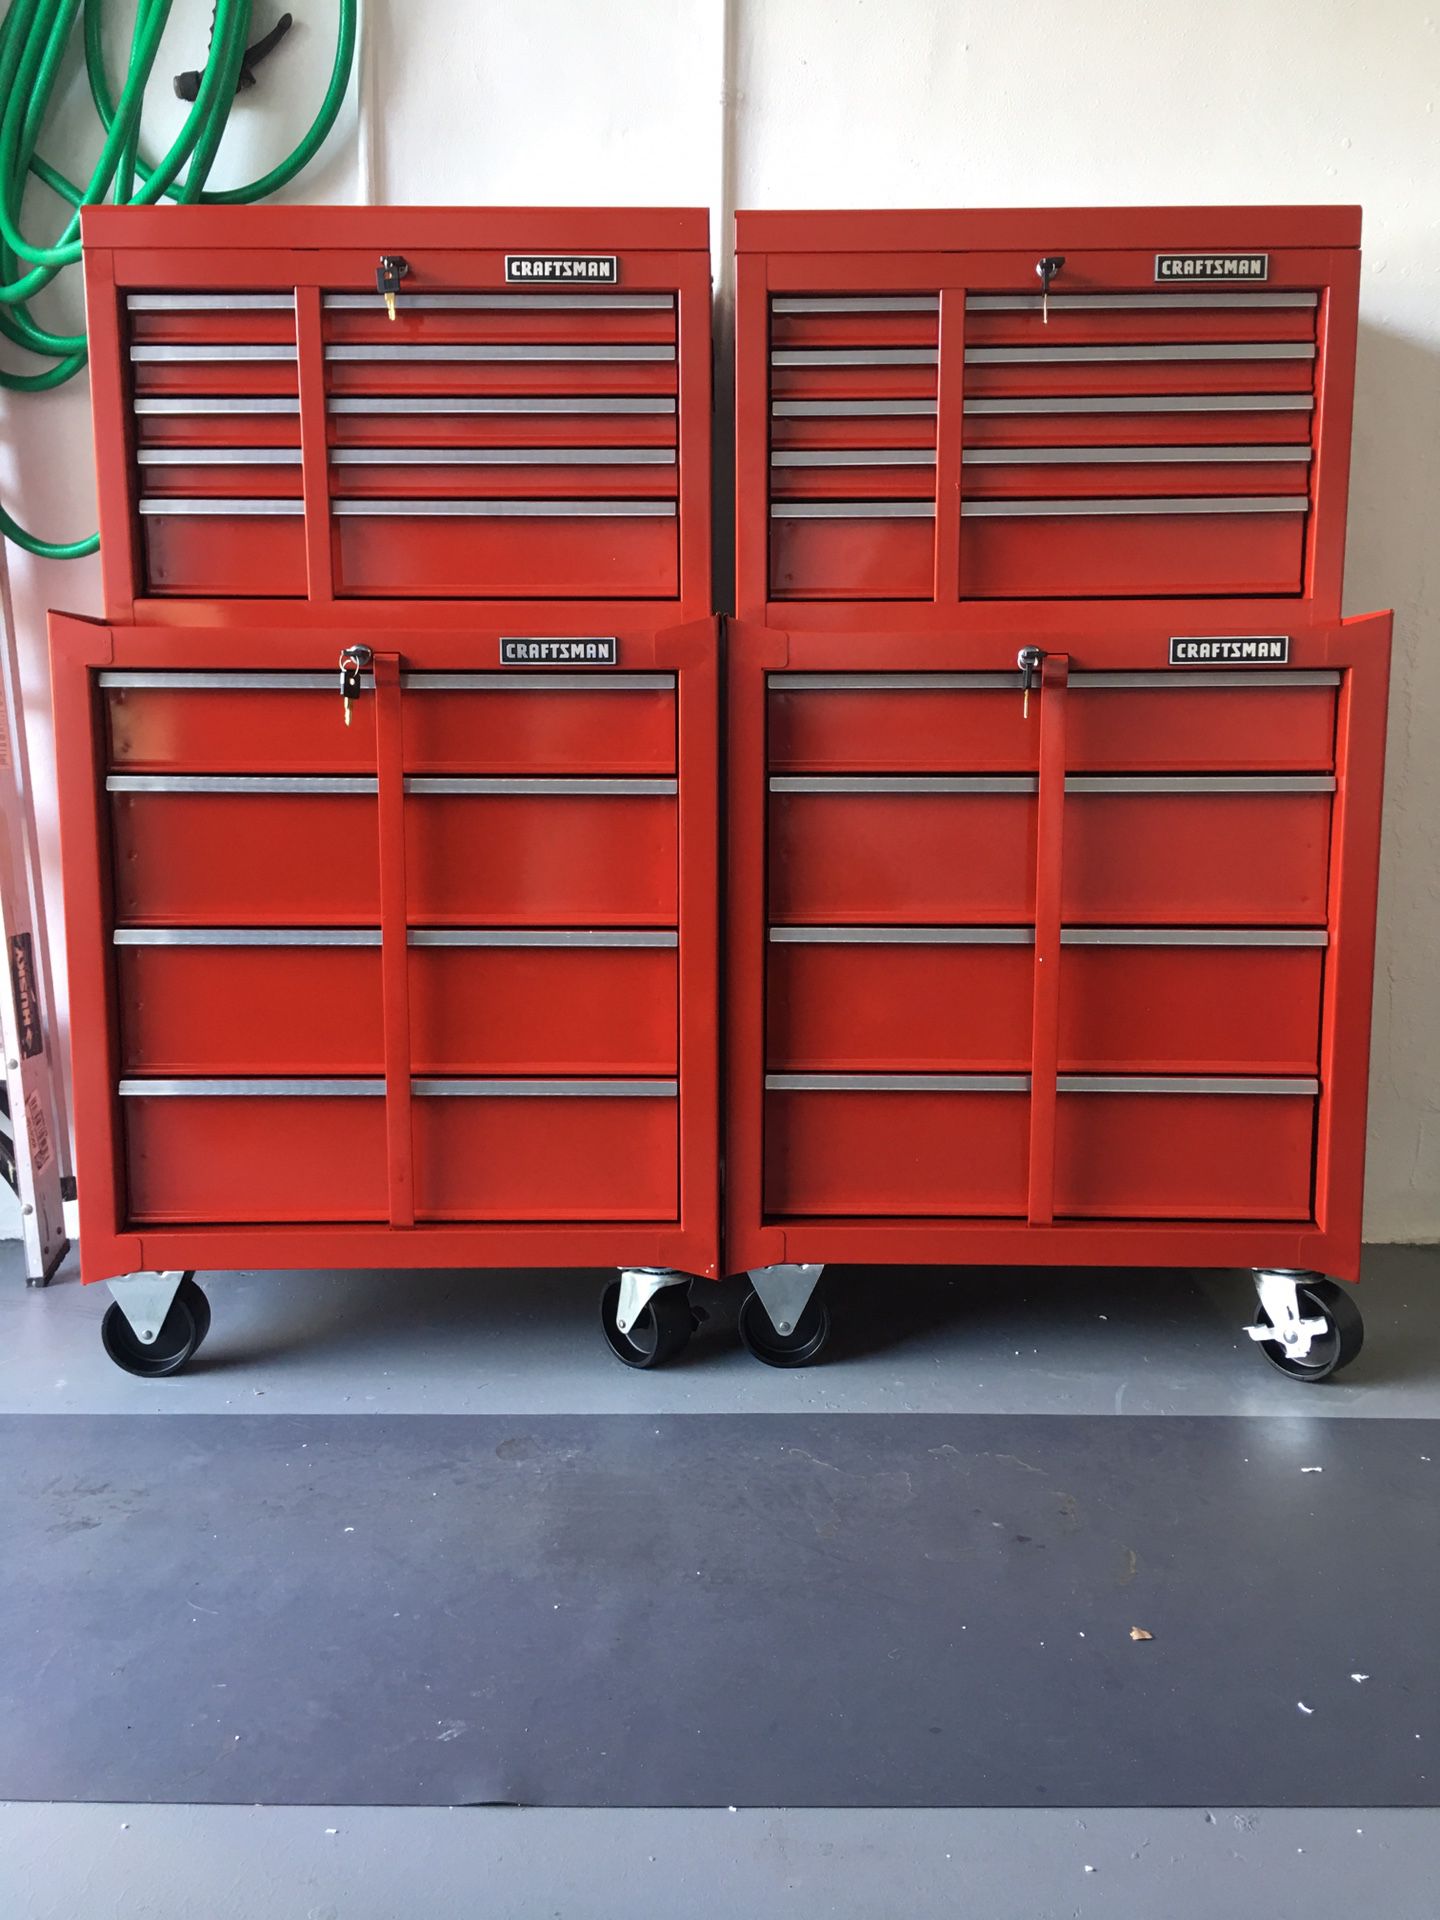 Tool boxes - 2 CRAFTSMAN top toolbox and rolling tool carts